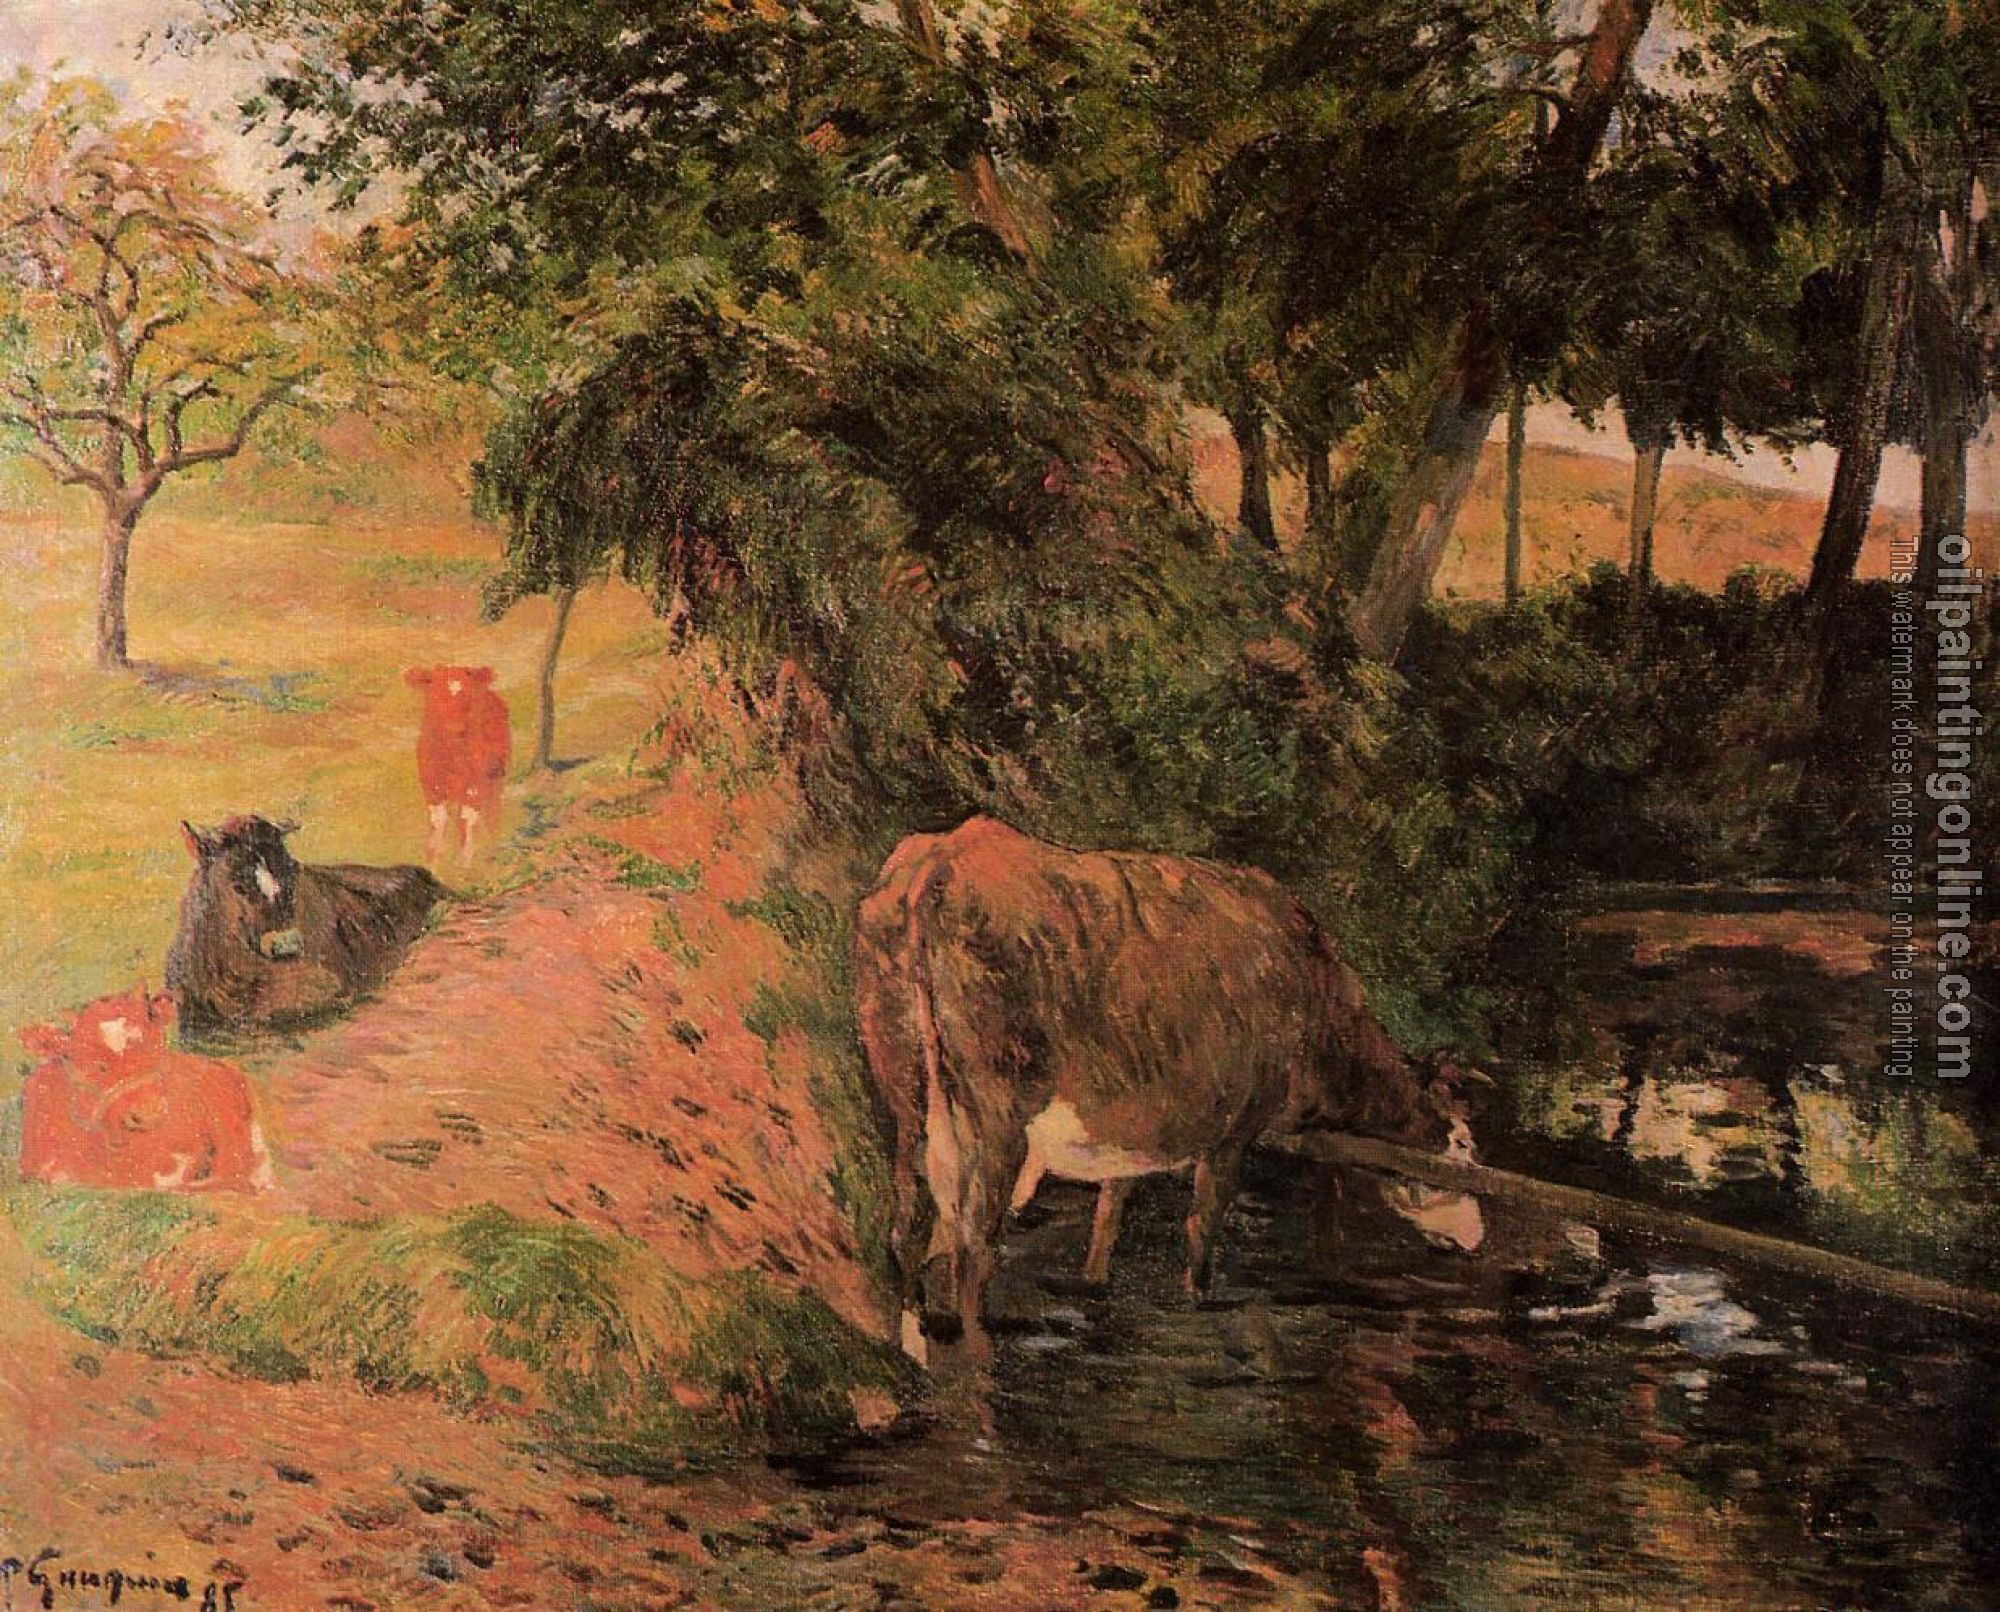 Gauguin, Paul - Landscape with Cows in an Orchard